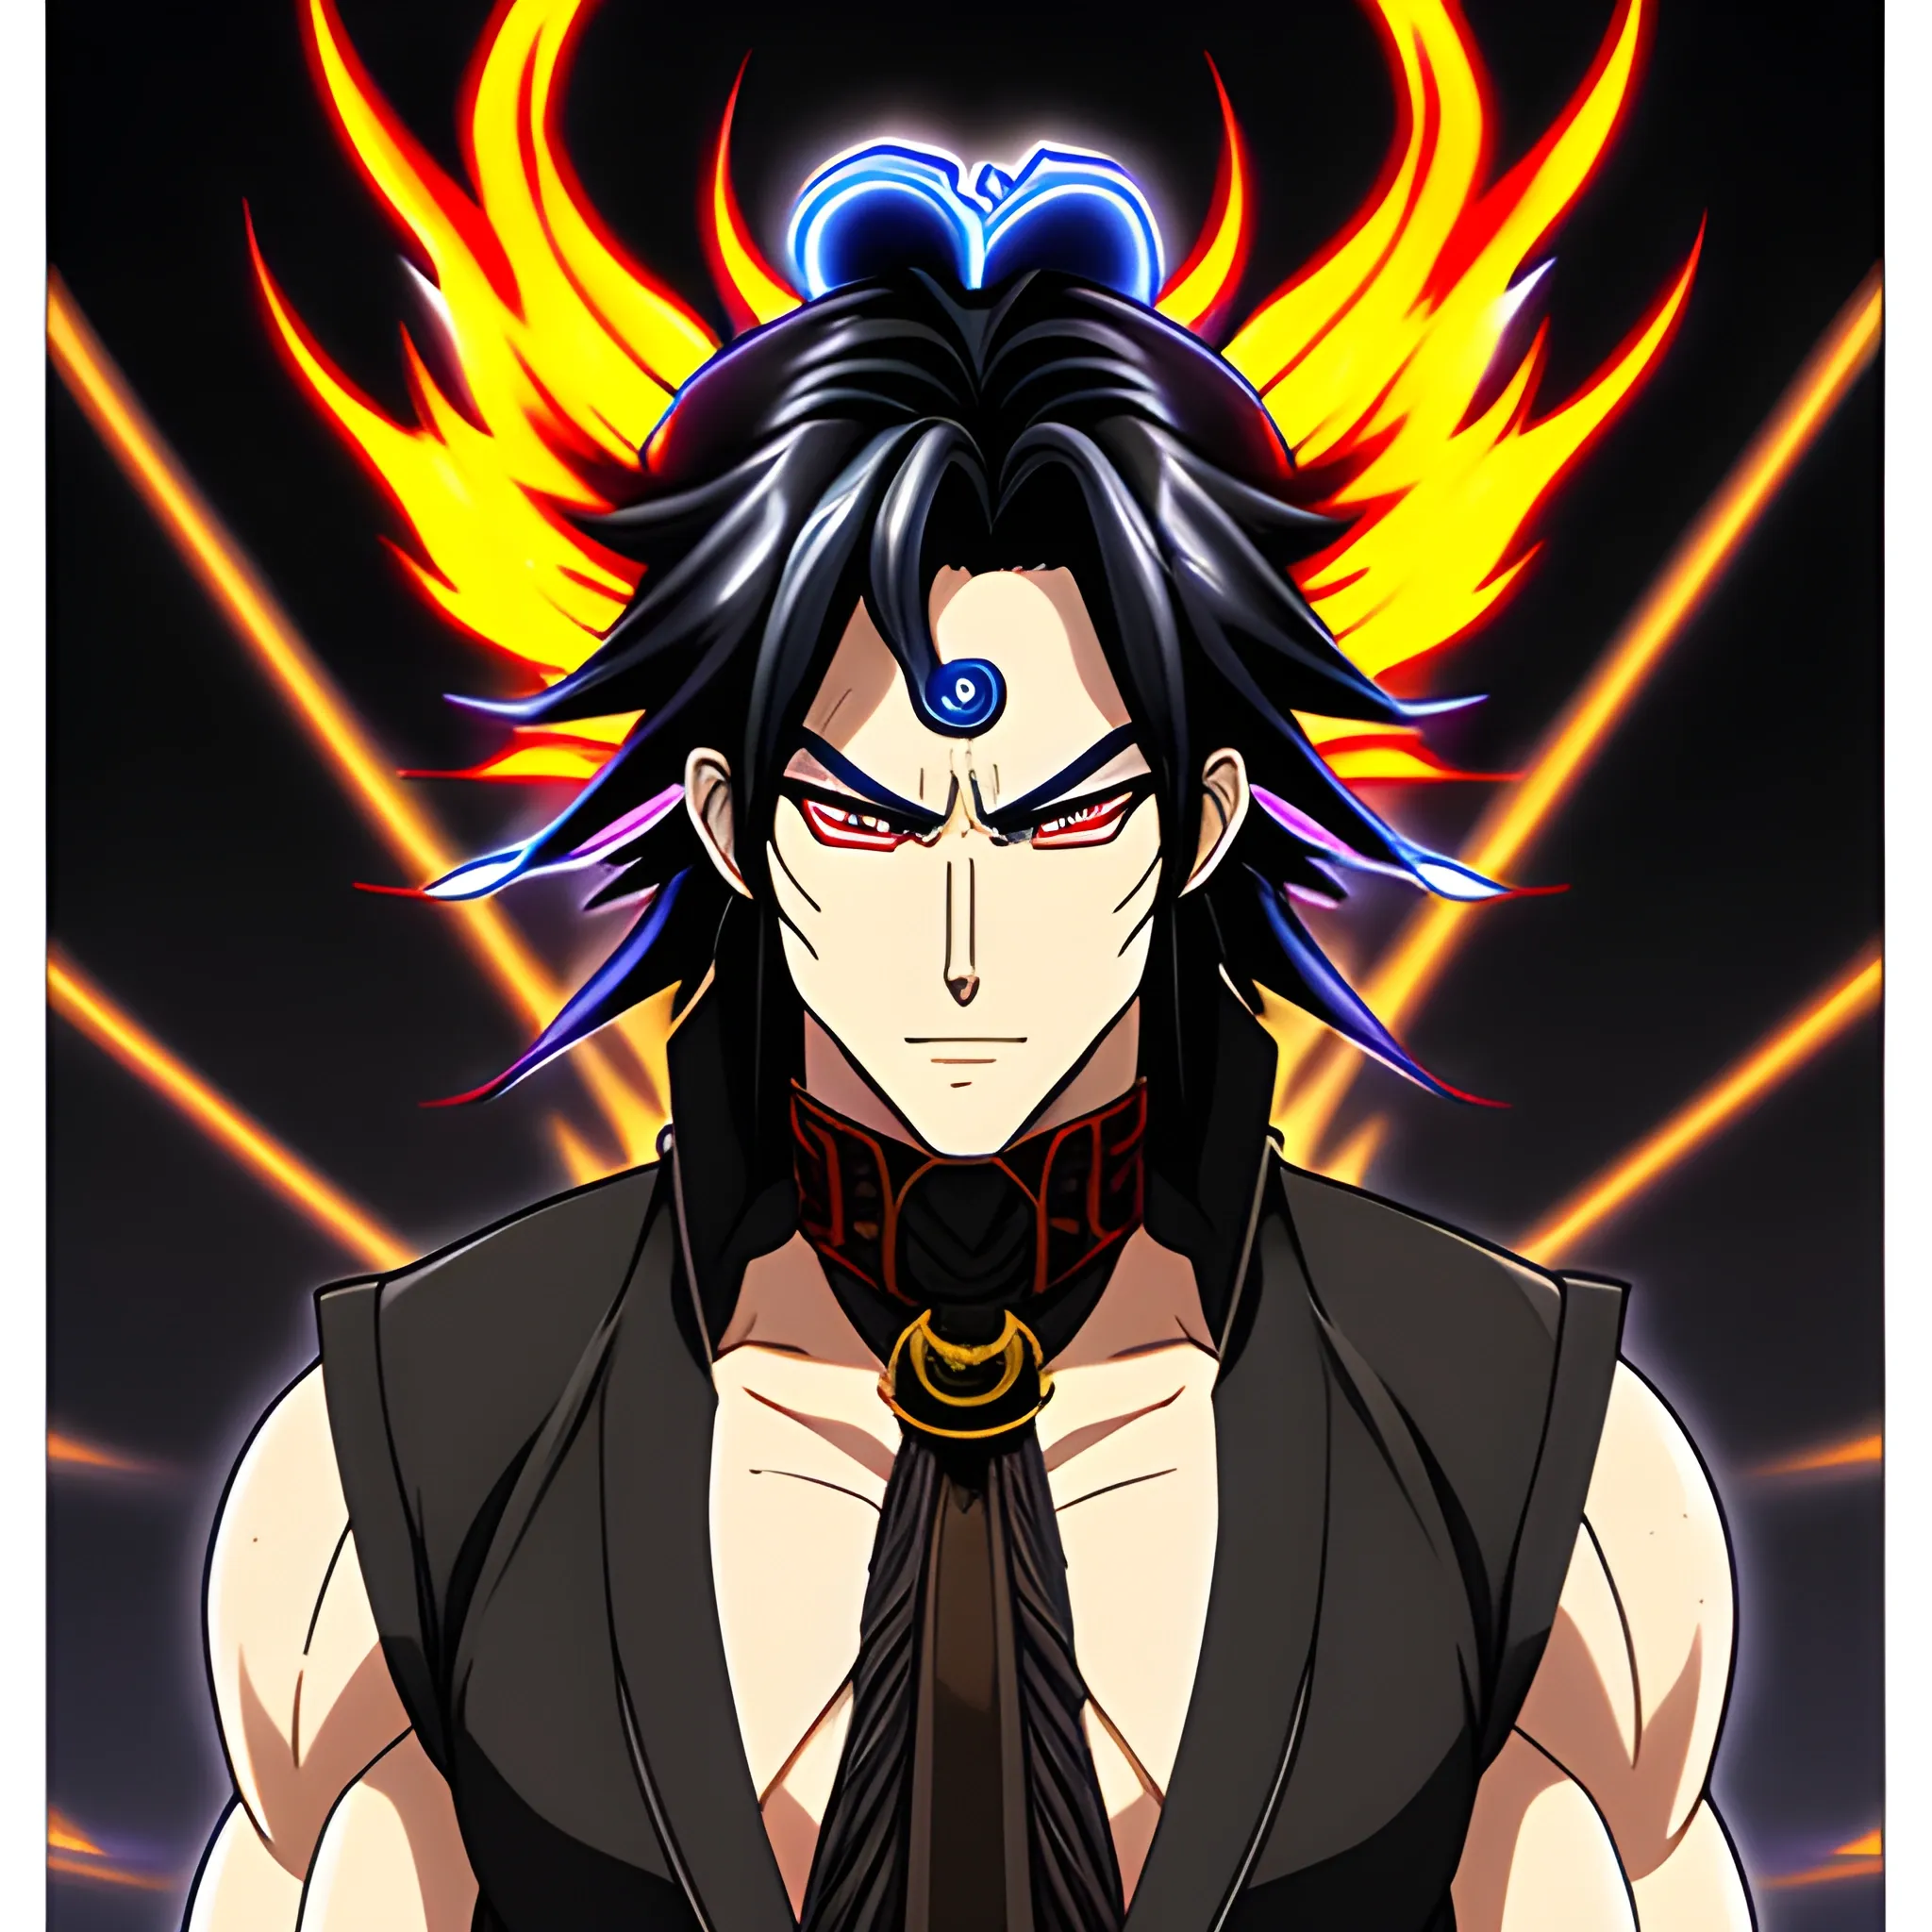 Anime style, male protegonist, black hair, blus flames, Indian, highschooler, Shiva, young, human, medium hair, normal world.